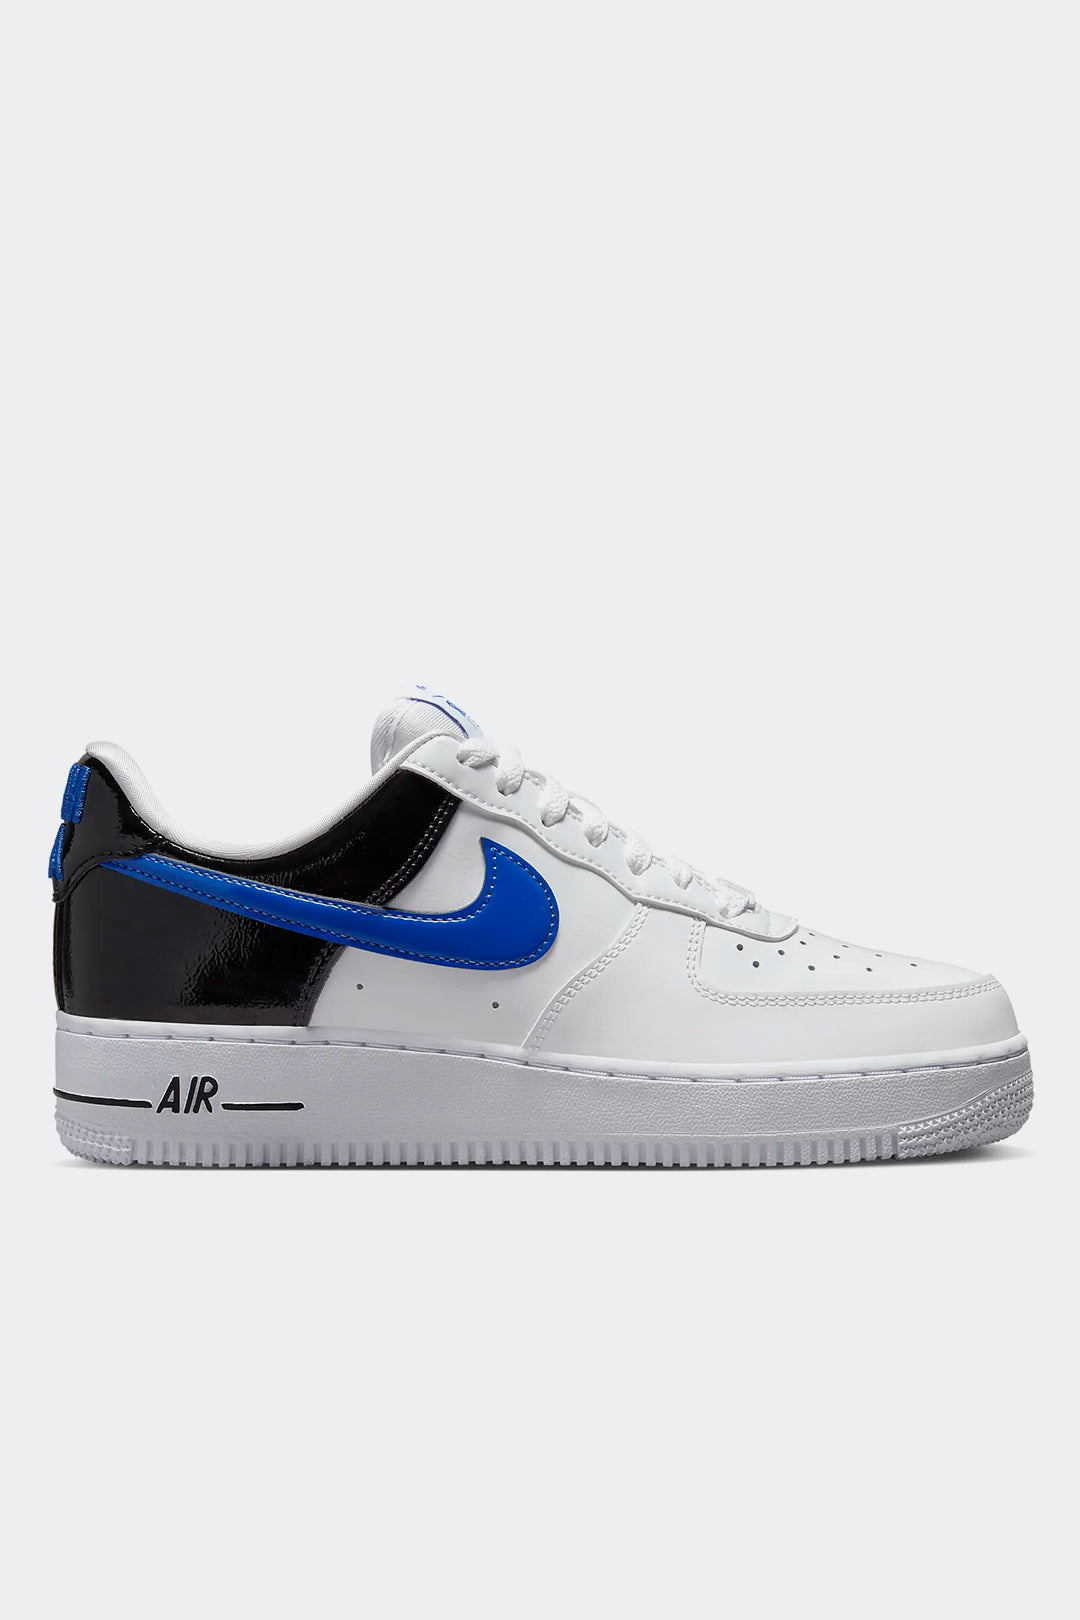 NIKE AIR FORCE 1 '07 ESS - MUJER - HYPE